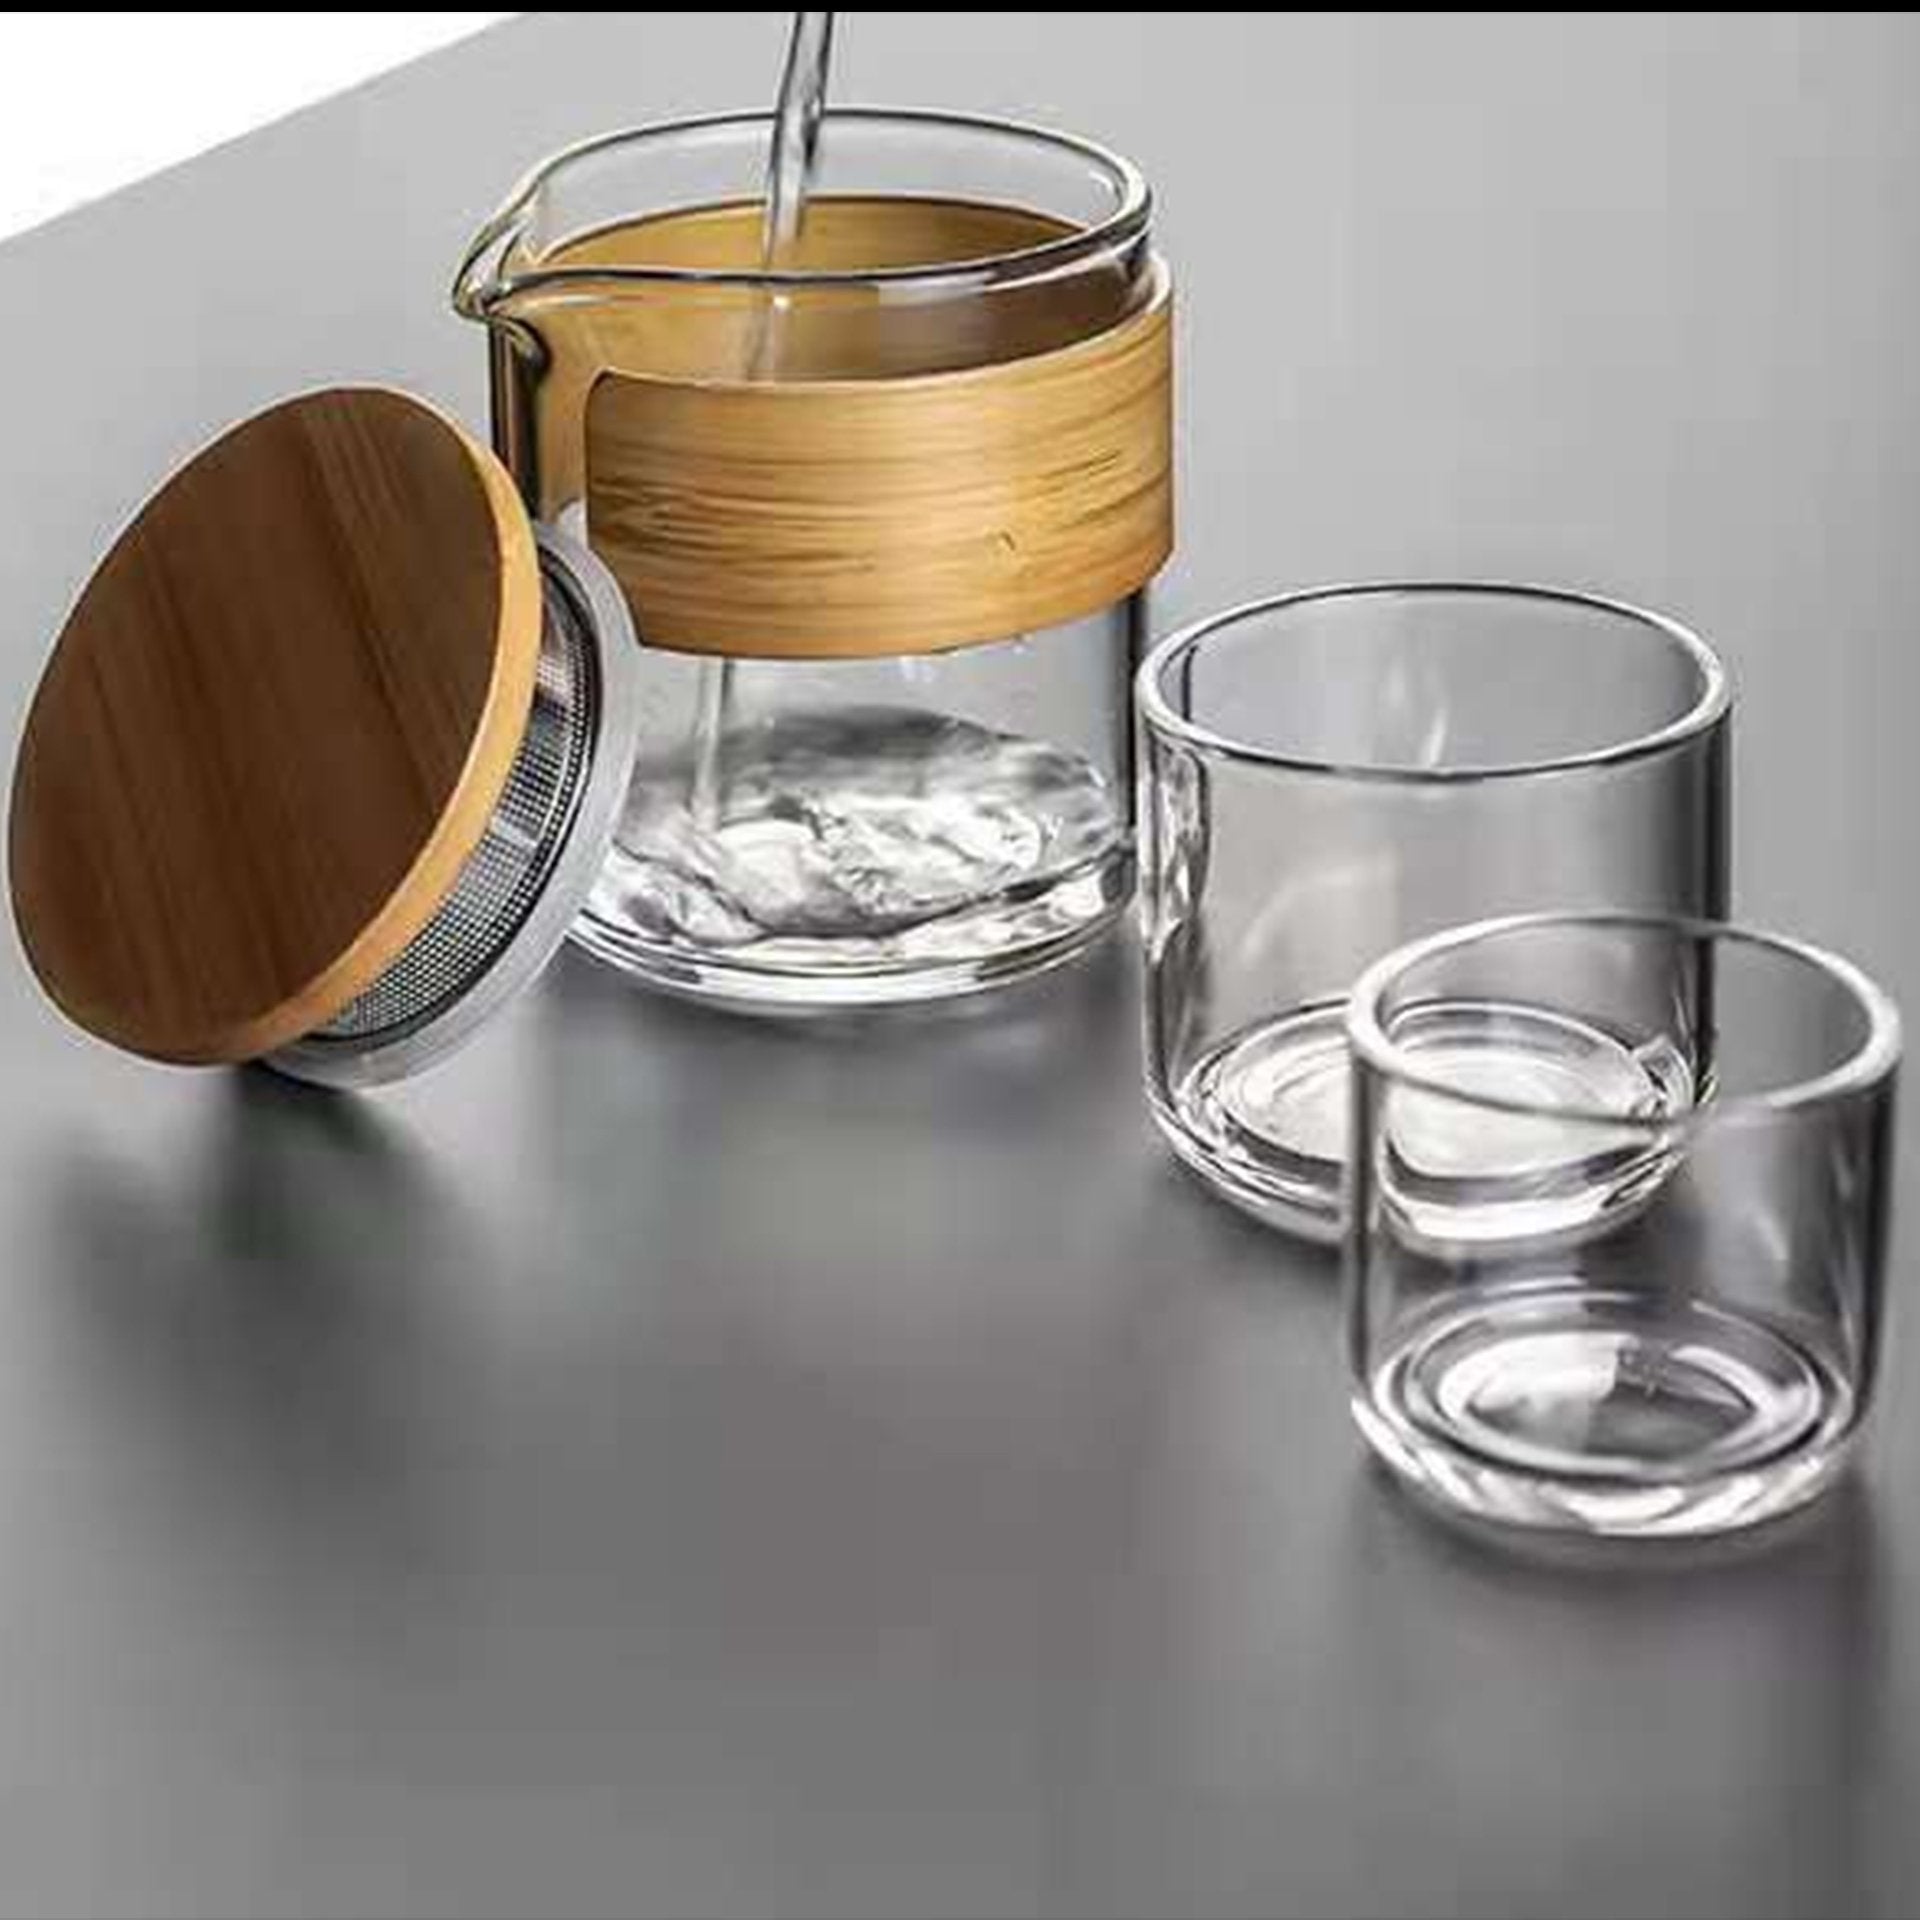 Glass tea infuser with bamboo accents being filled, next to empty glasses.